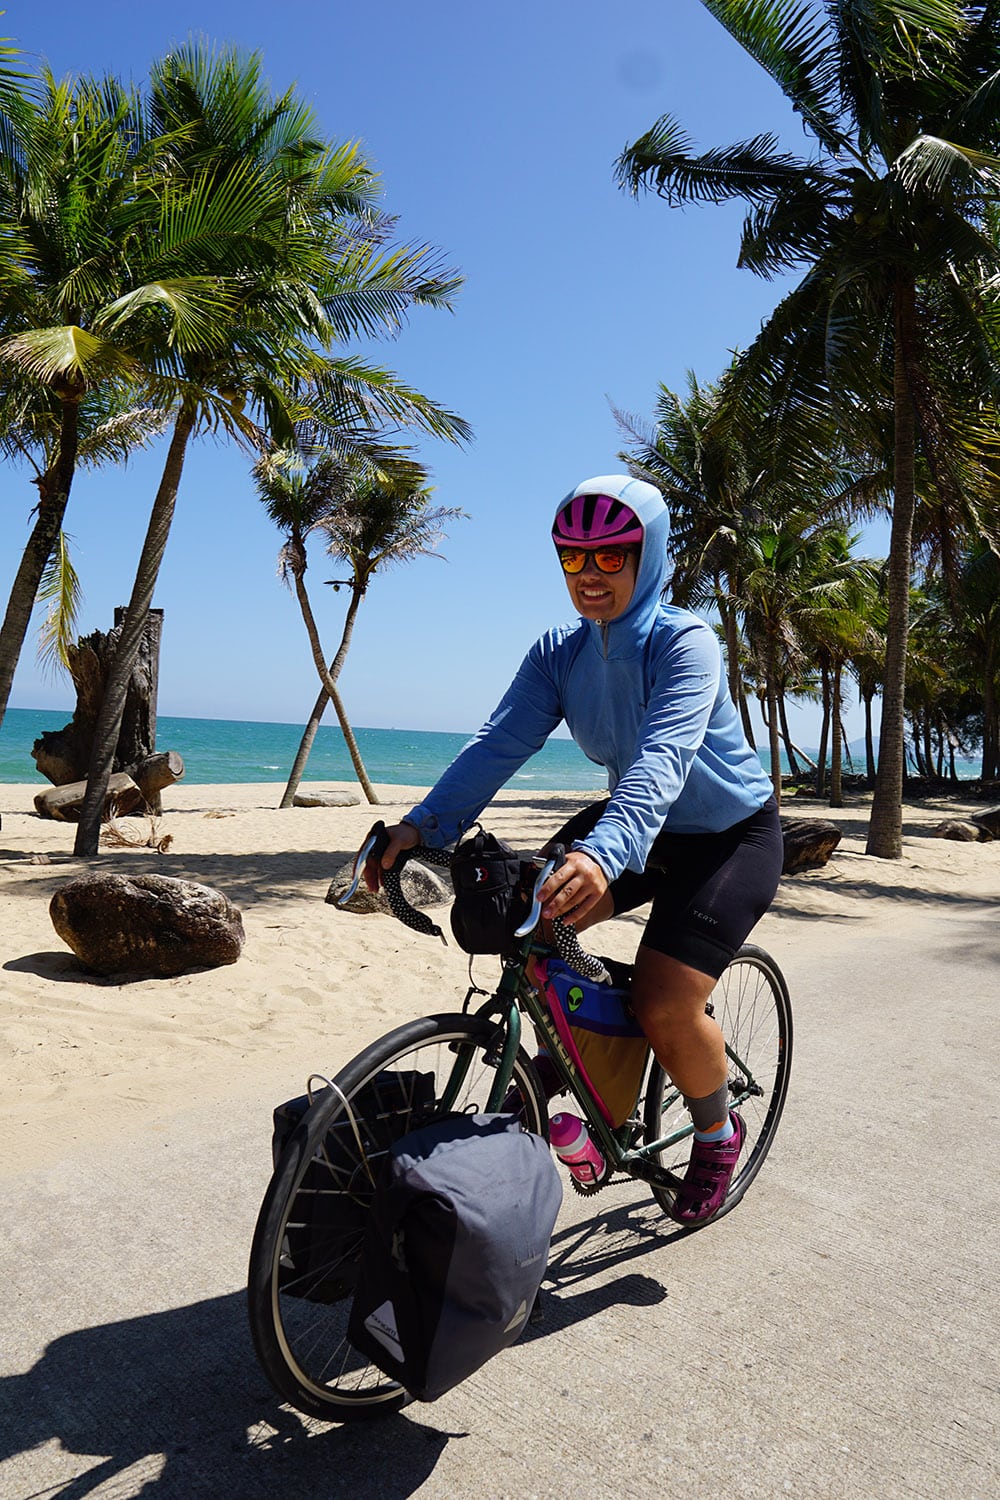 Cycling in the heat of the day, trying to keep the sun off - Ban Krood Beach, Thailand